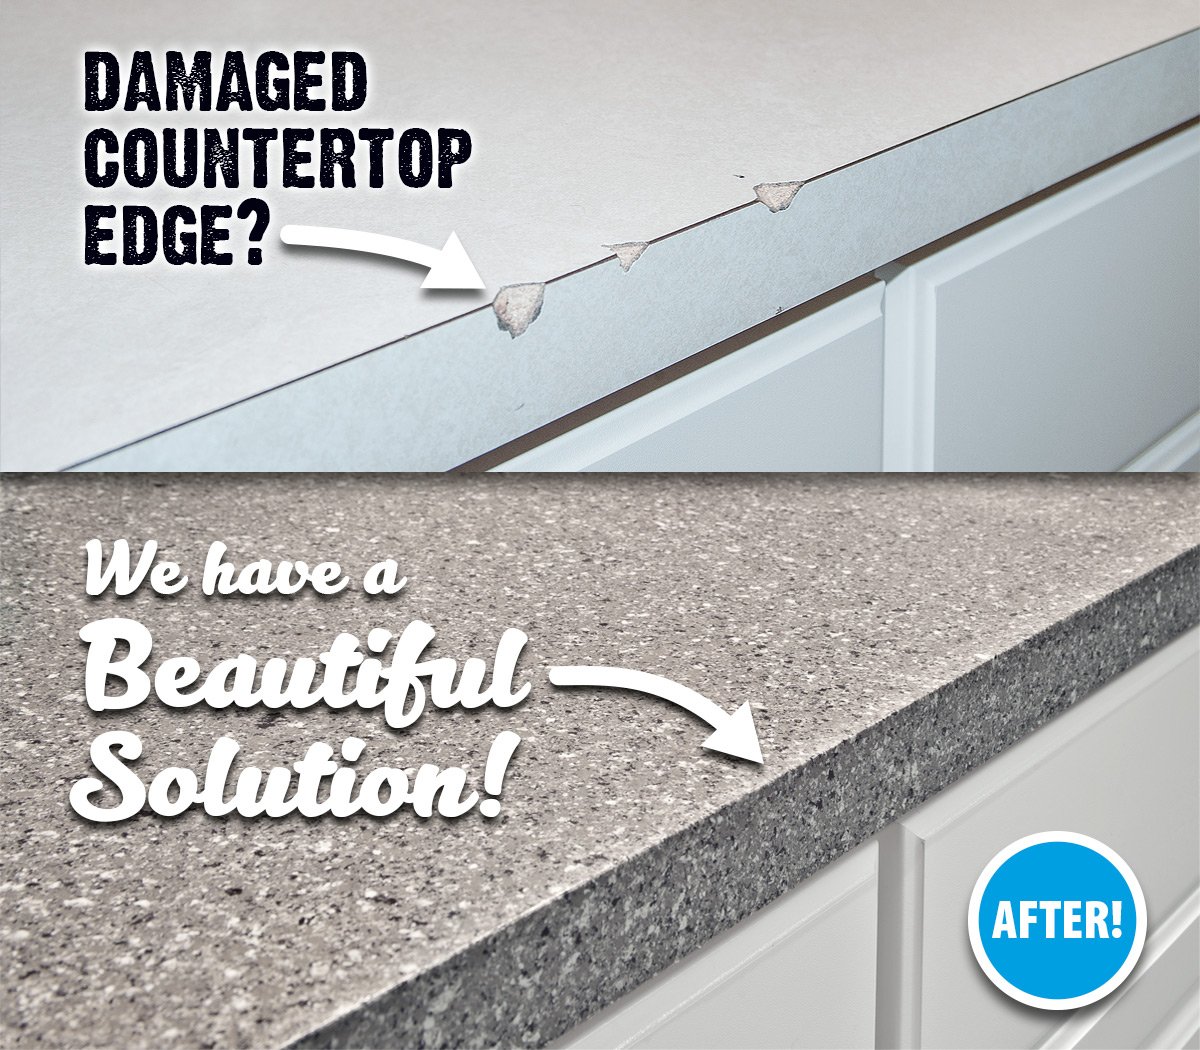 Miracle Method On Twitter Damaged Countertop Edge No Problem